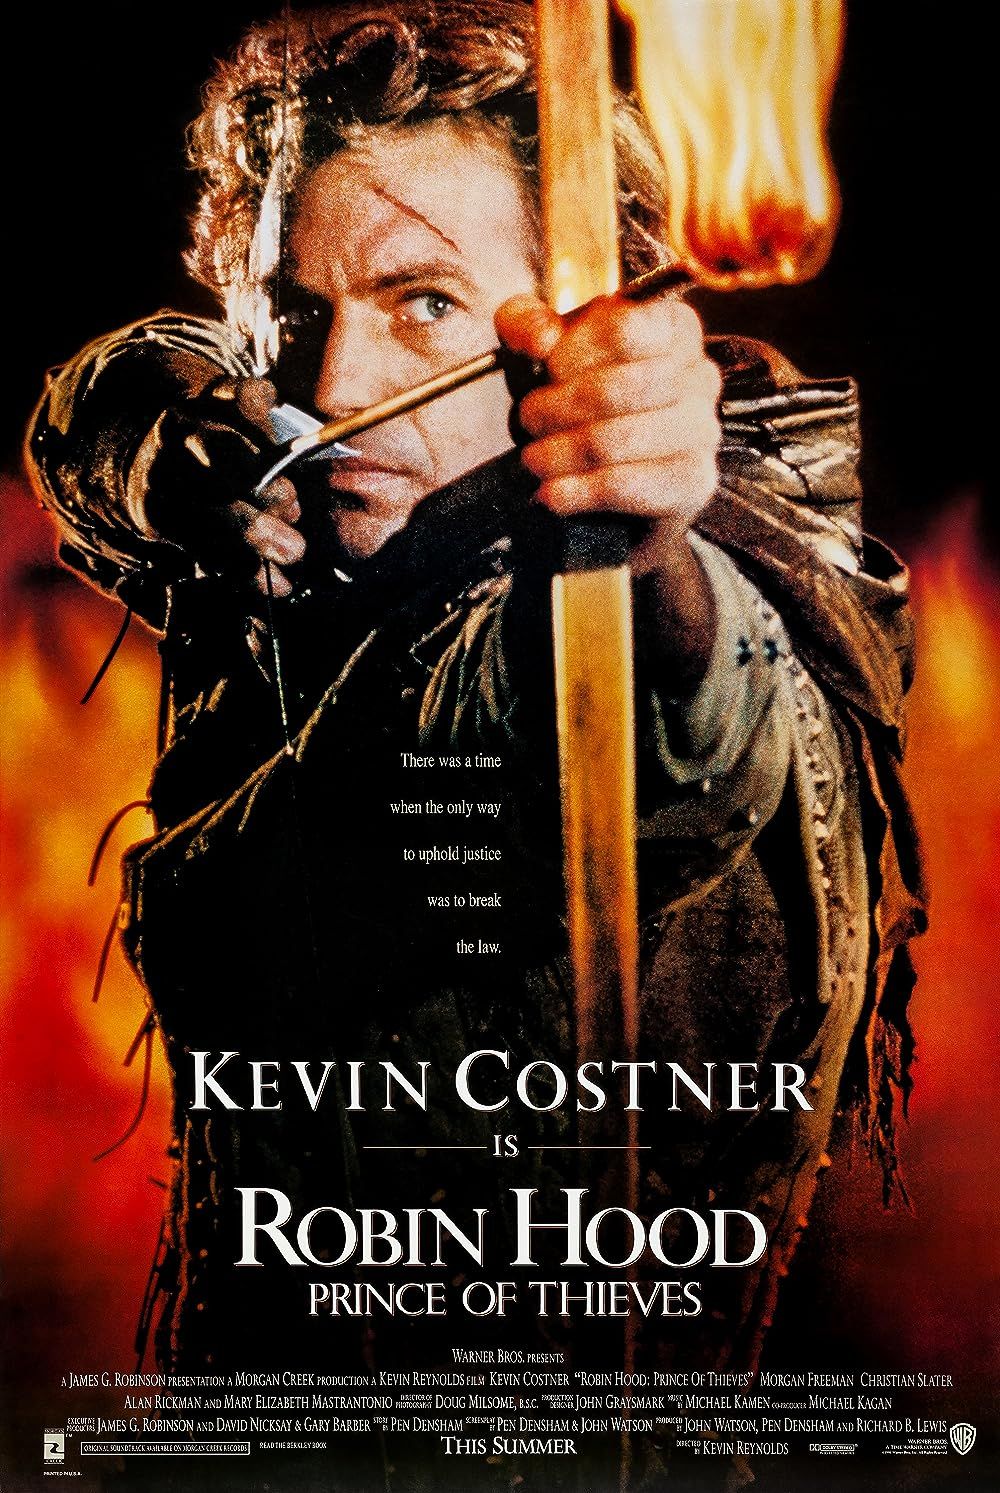 Kevin Costner as Robin Hood Aims an Arrow on the Robin Hood Prince of Thieves Poster